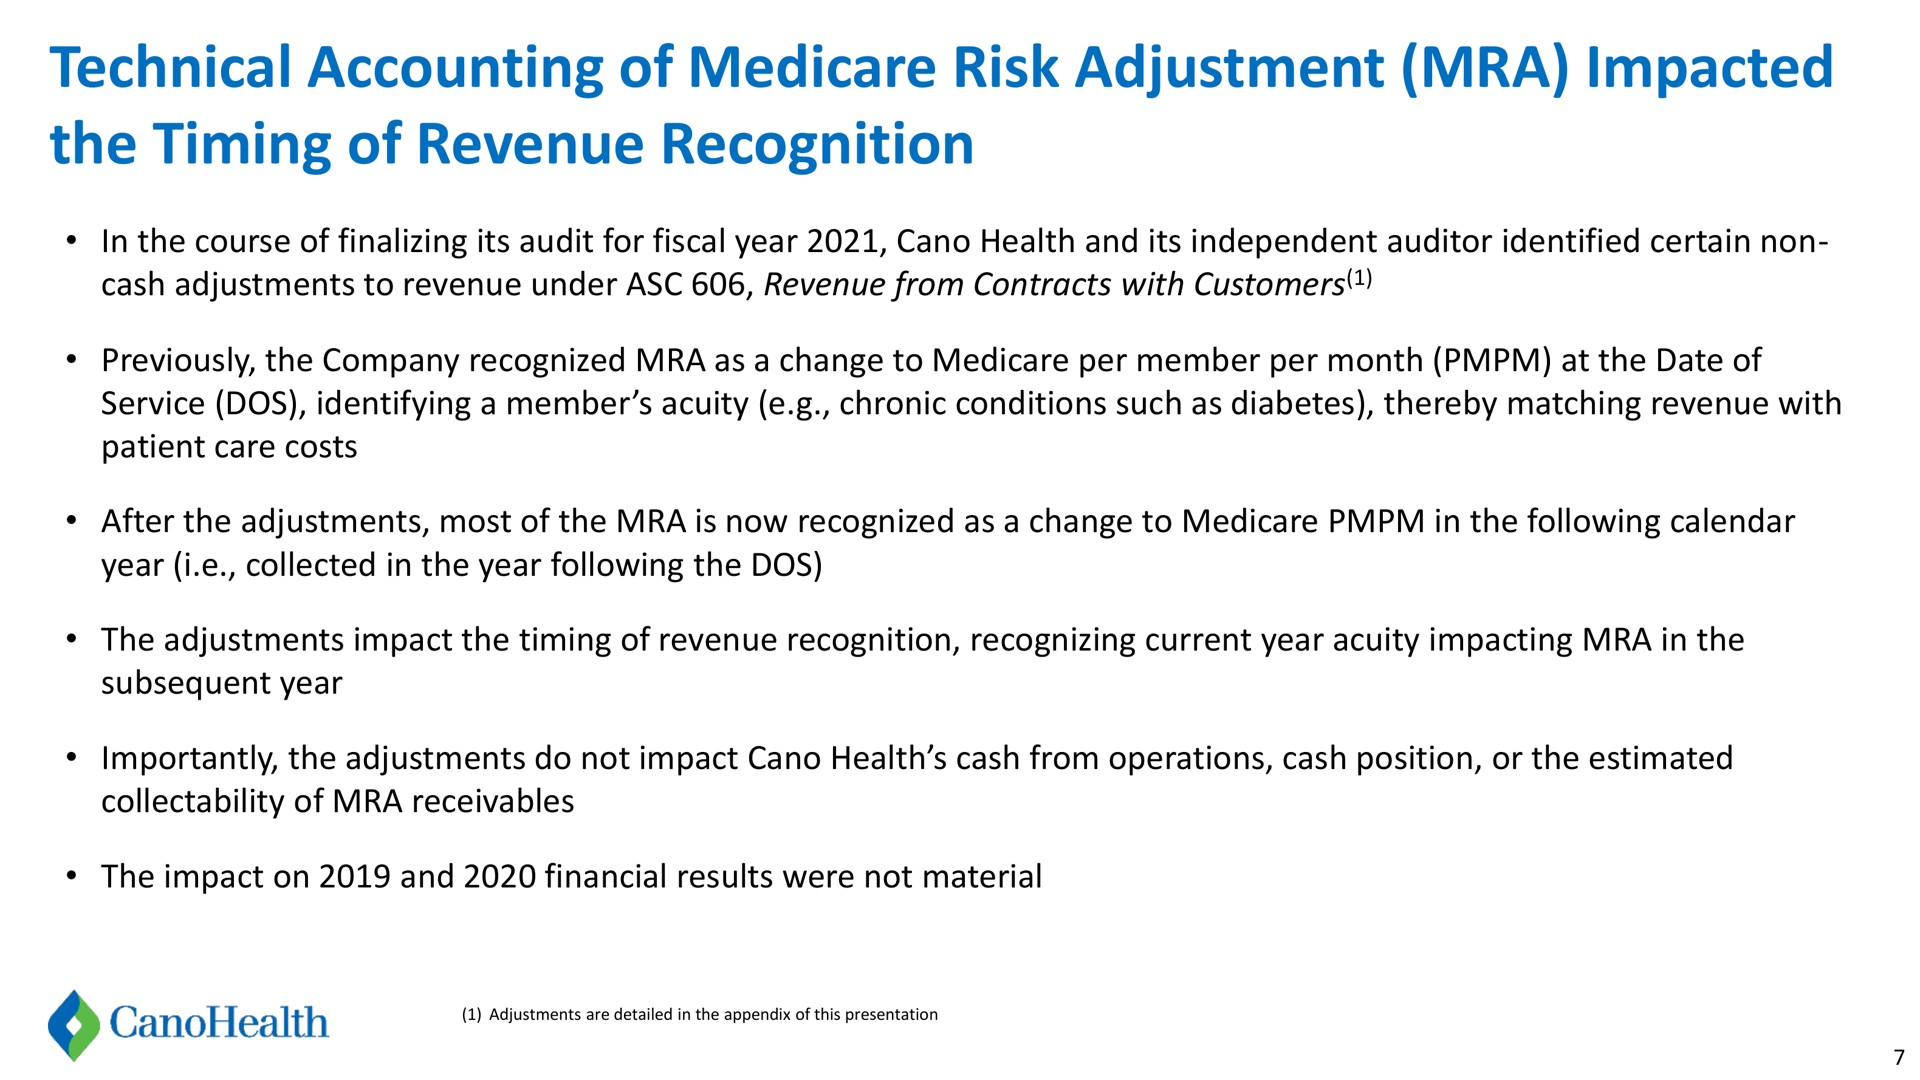 technical accounting of risk adjustment impacted the timing of revenue recognition | Cano Health